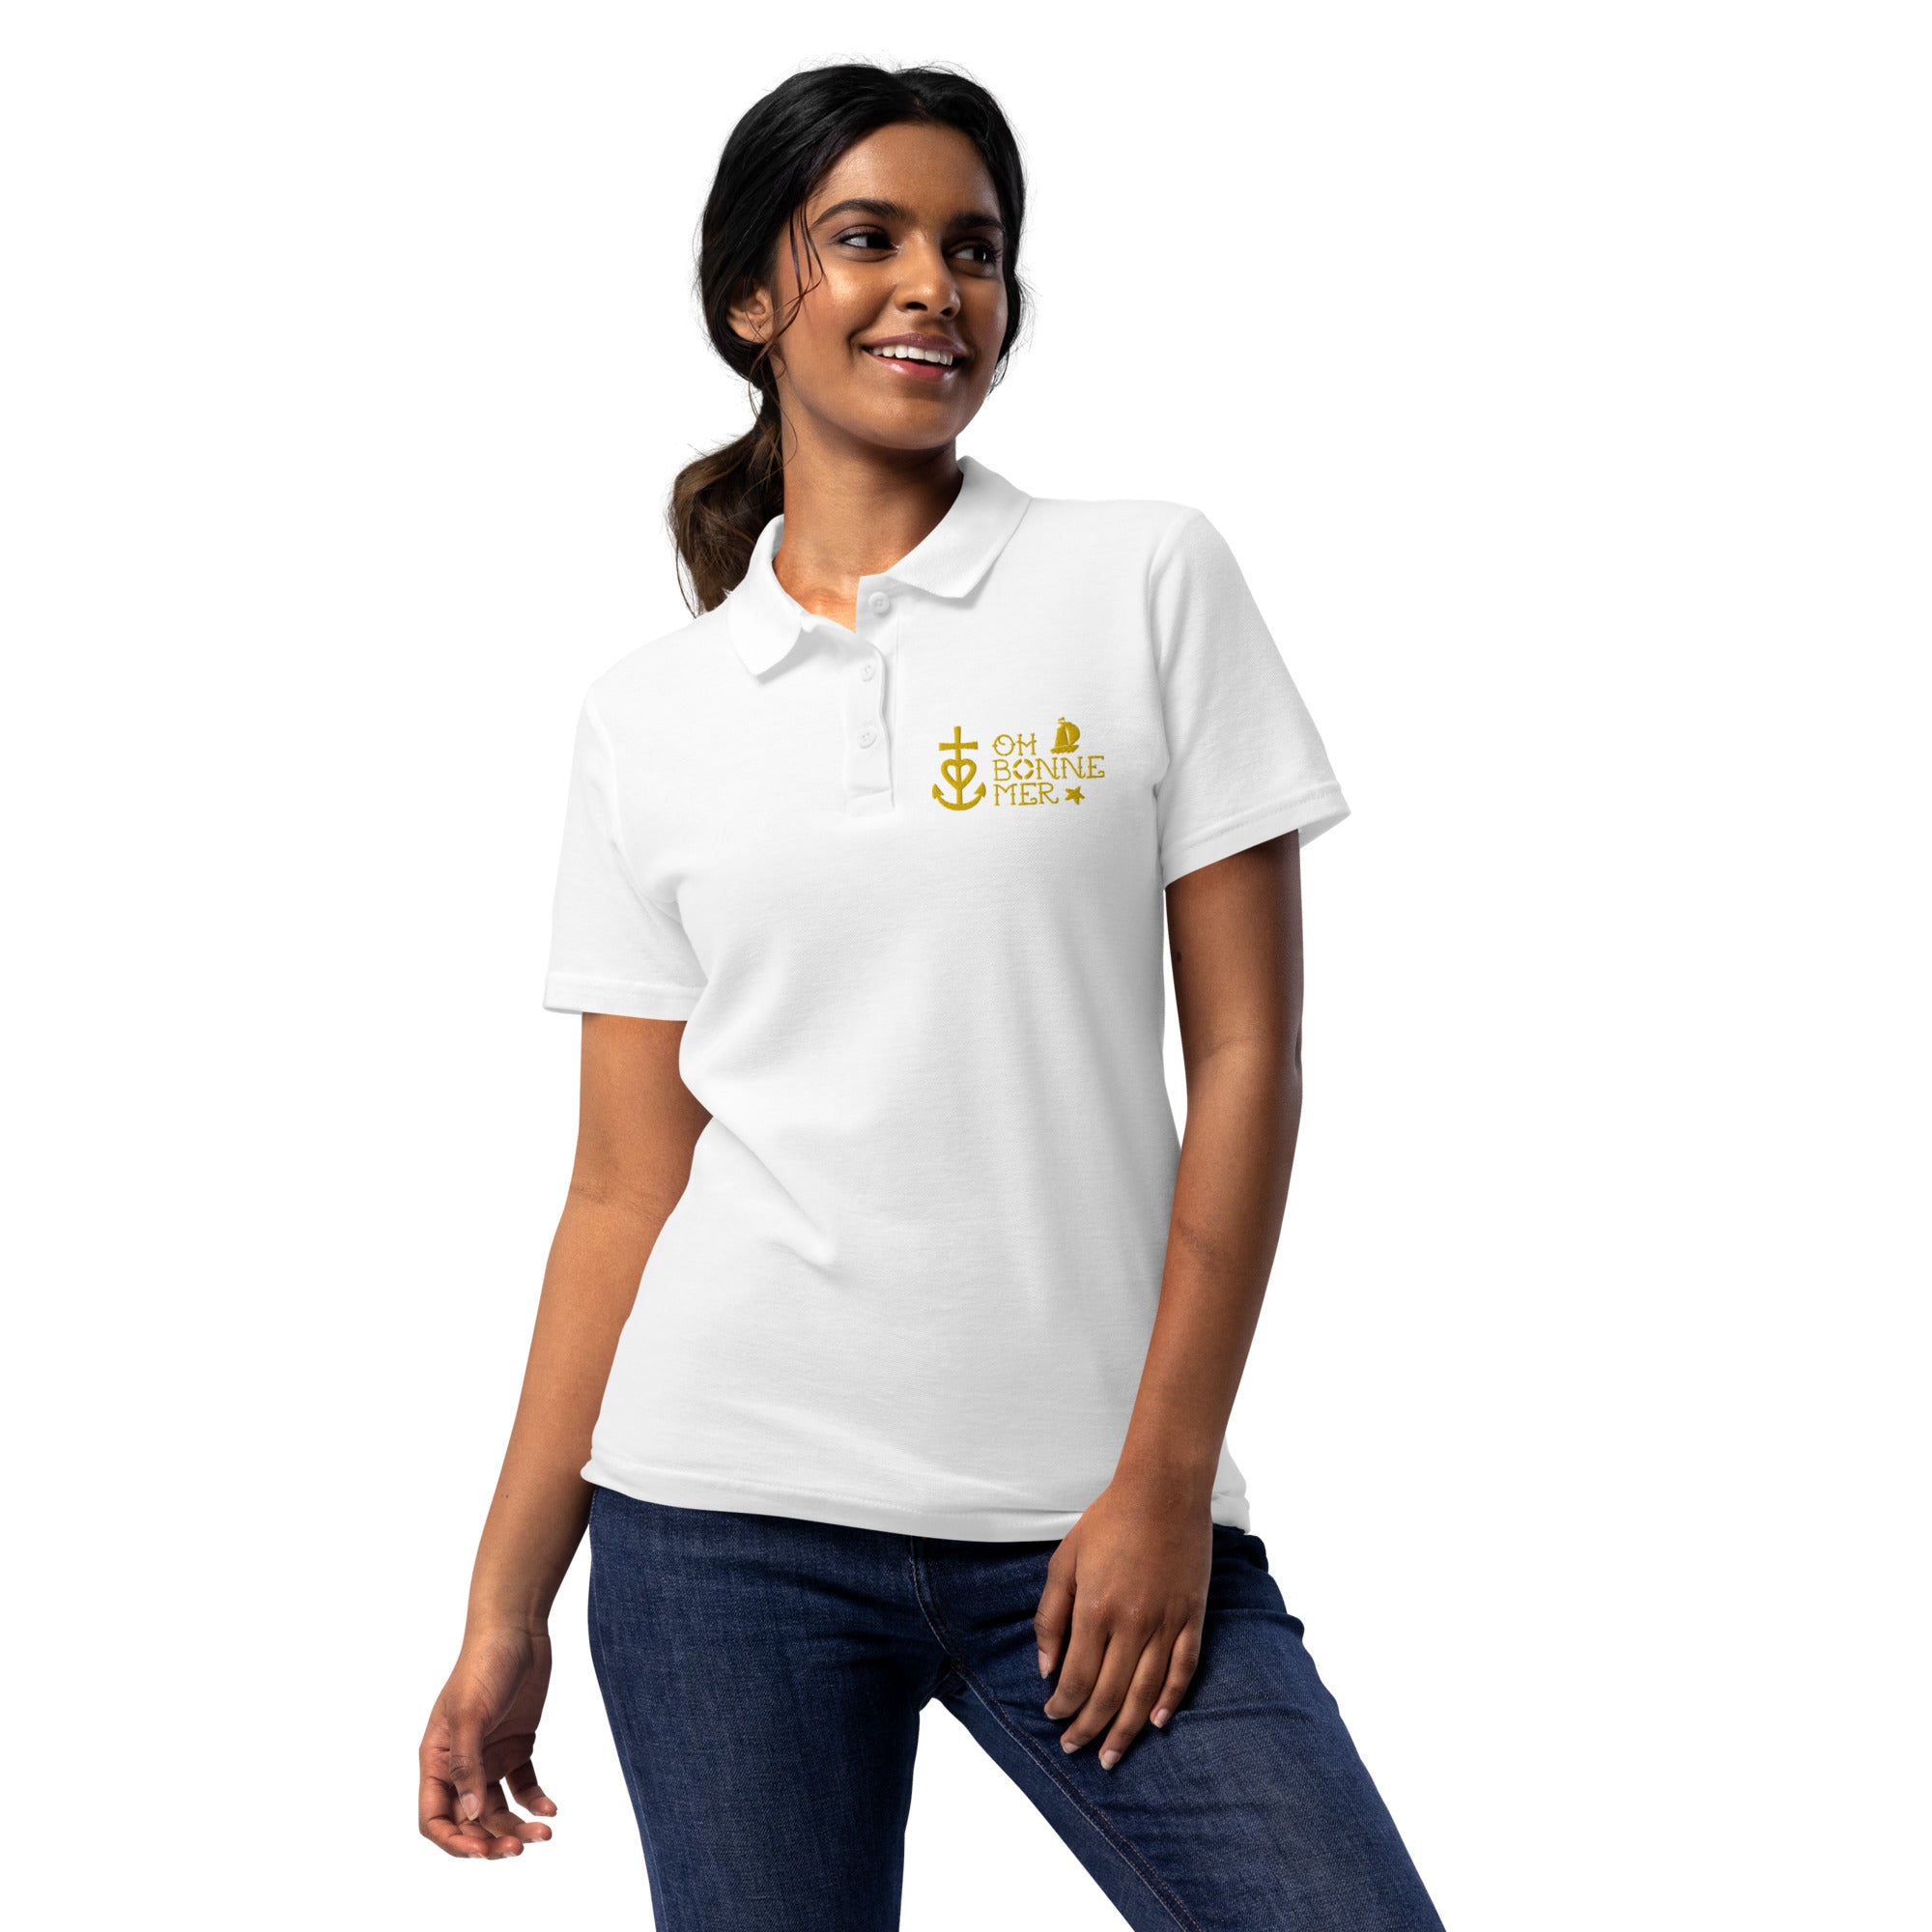 Women’s pique polo shirt Oh Bonne Mer 2 embroidered pattern